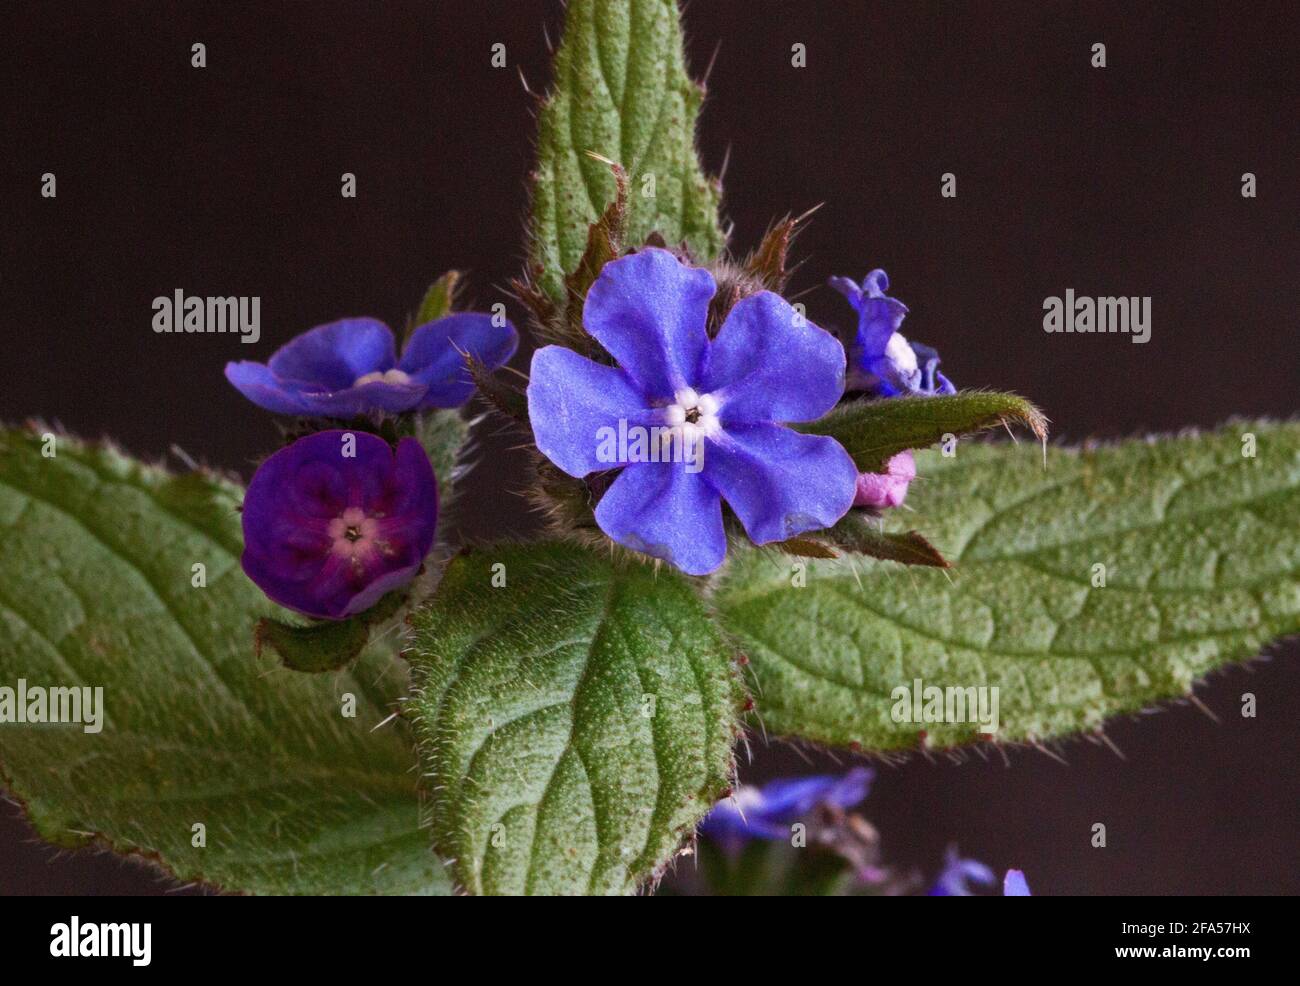 Introduced into the UK from SW Europe, Green Alkanet is a spring flowering member of the borage family. they have a distinctive hairy stem and leaves Stock Photo